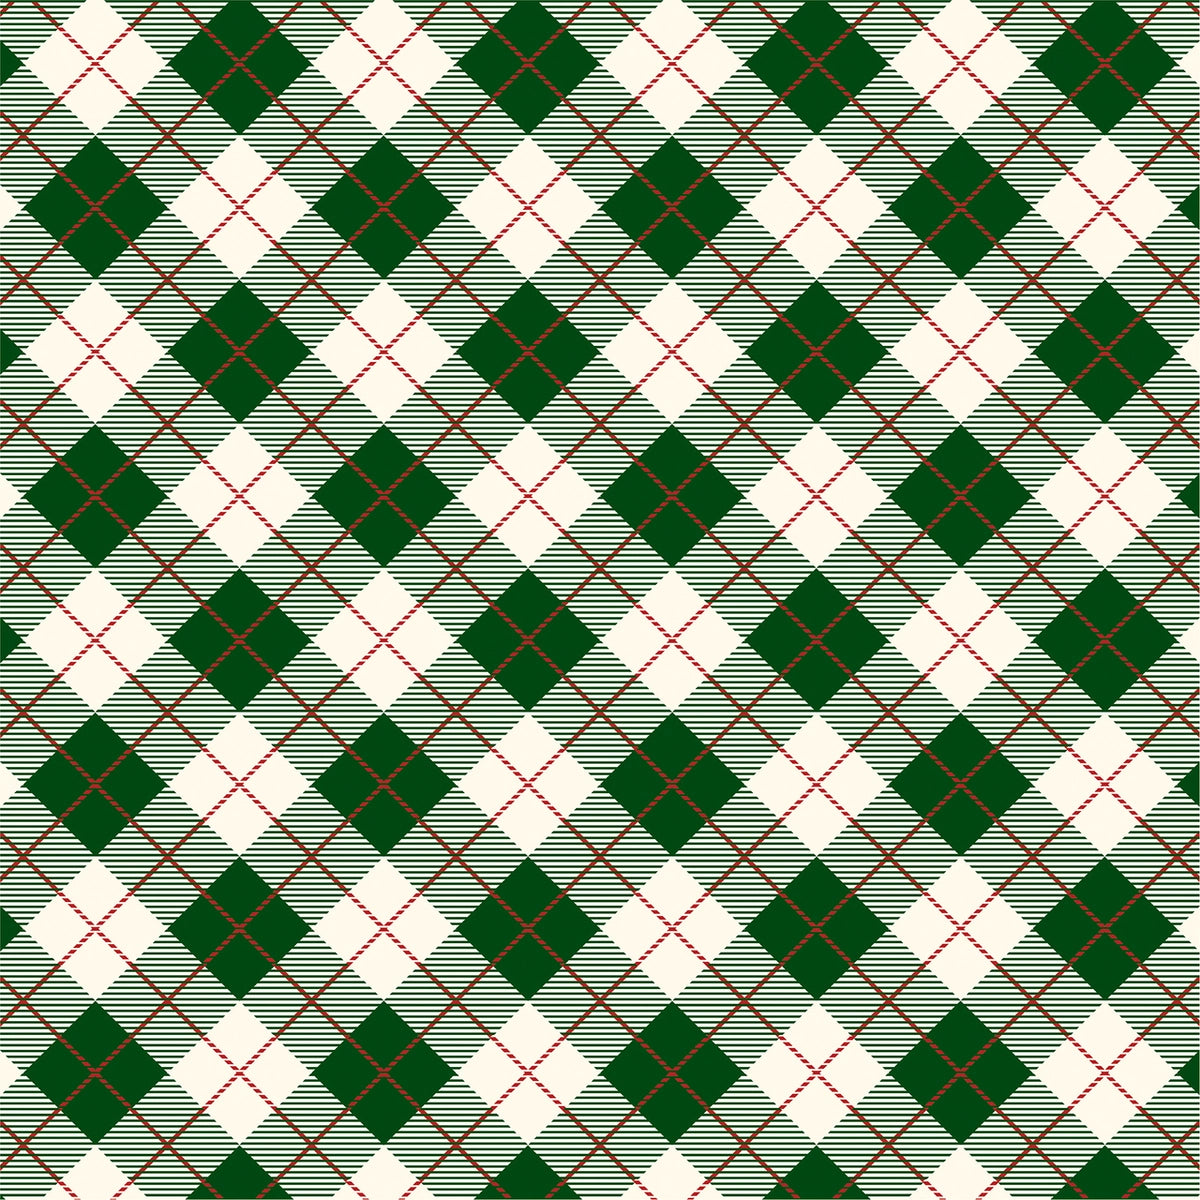 Side B - green and red plaid on an off-white background